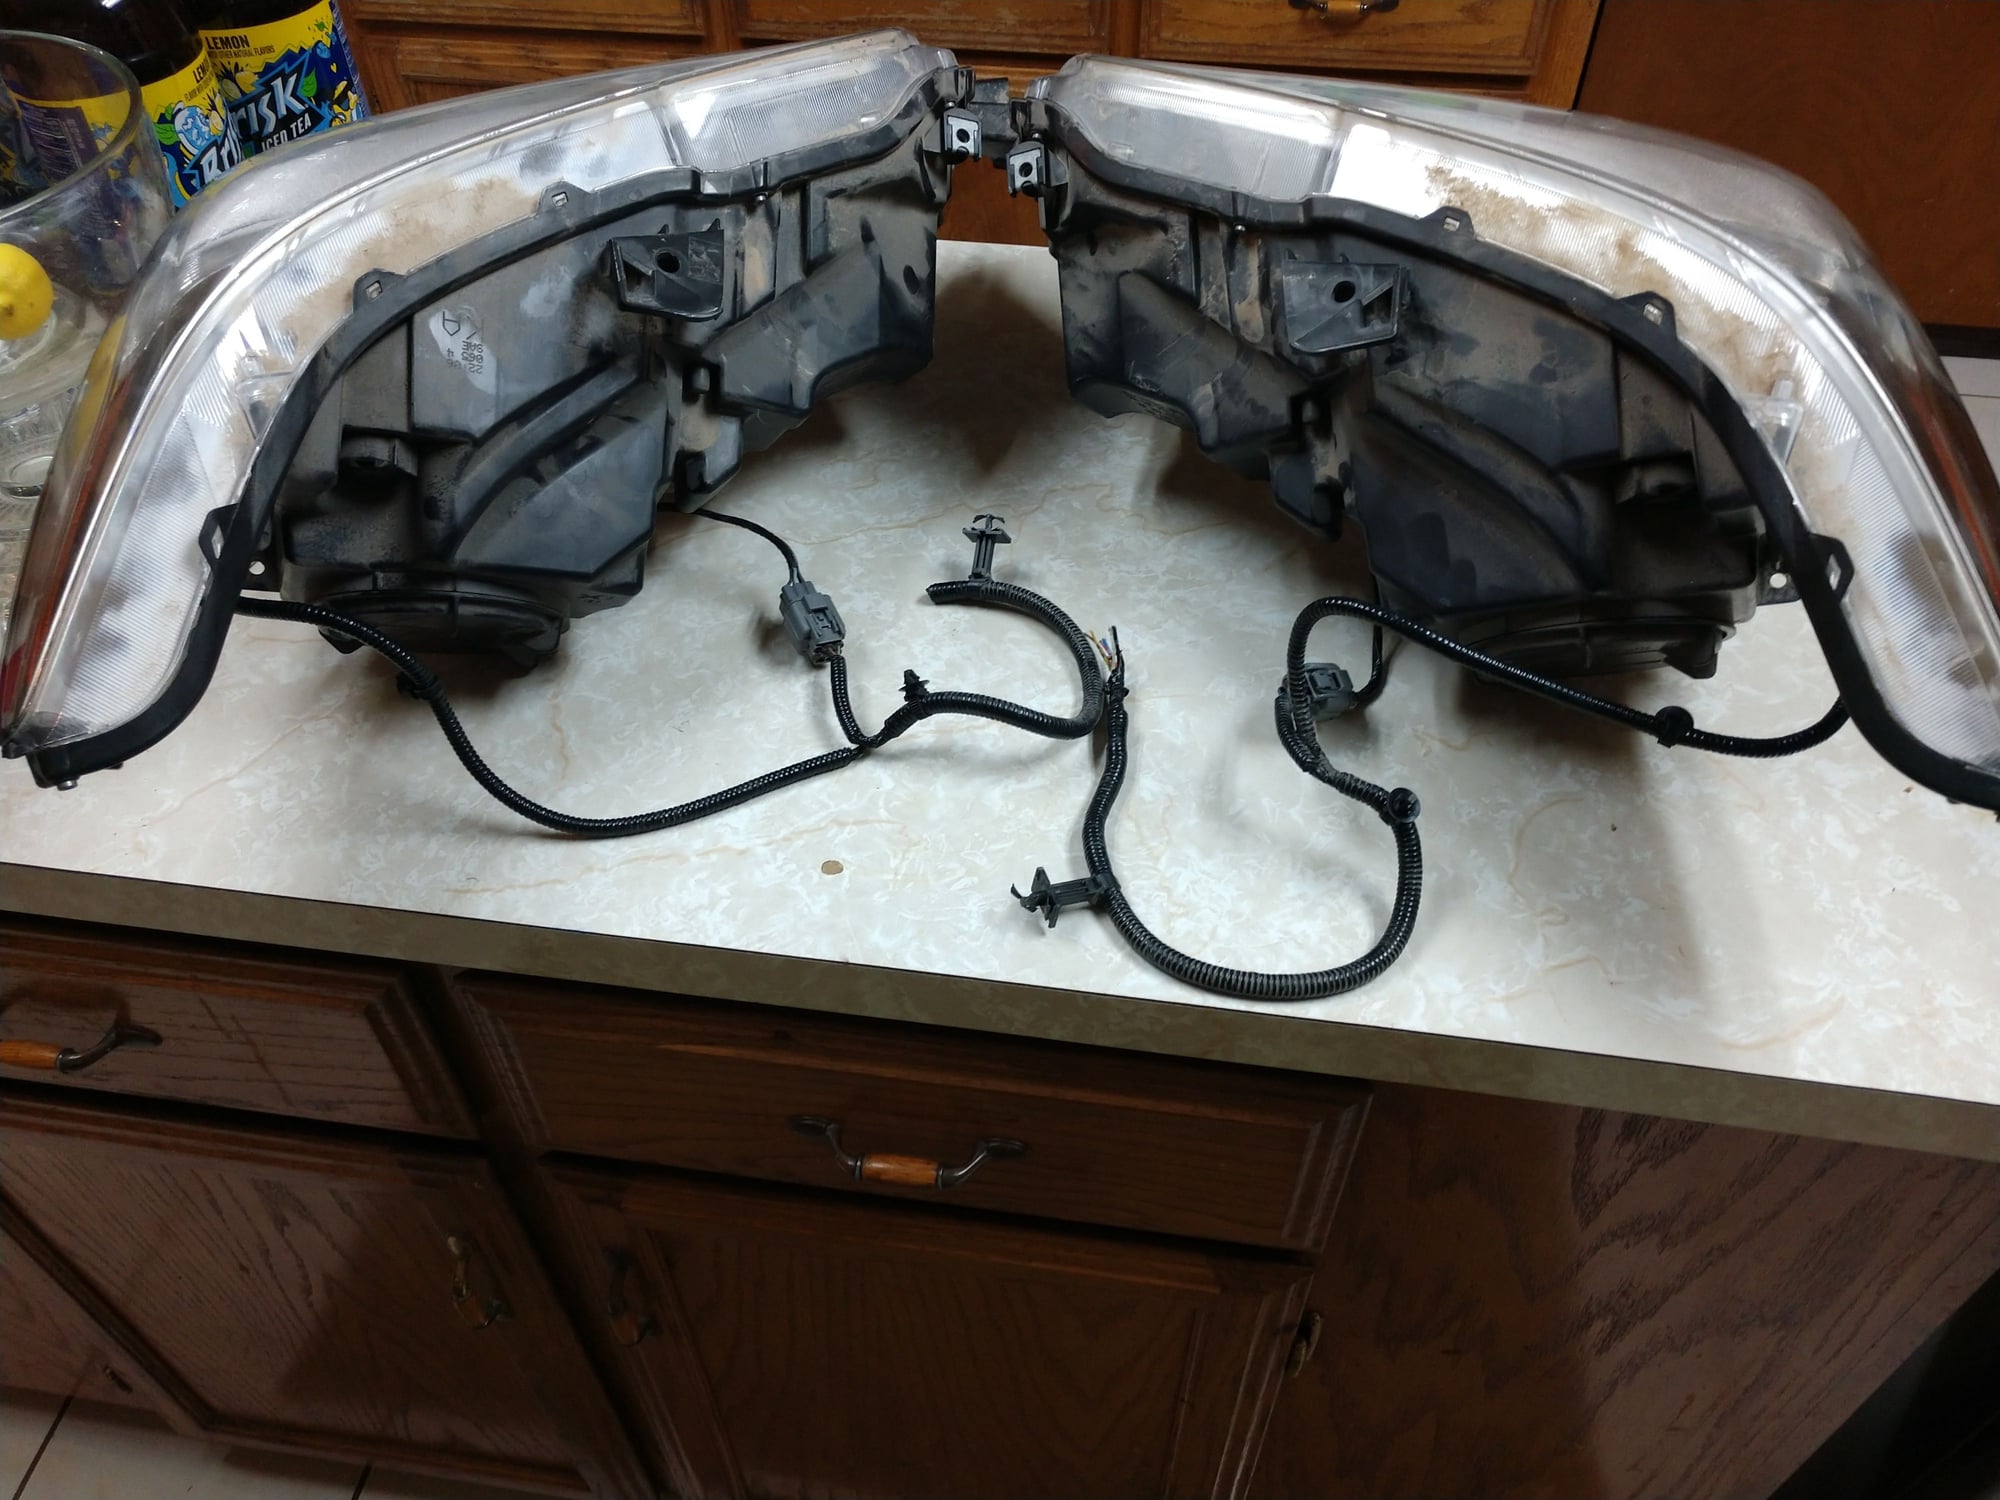 Lights - FS: 14-16 mdx headlights COMPLETE bulbs, ballasts, igniters, brackets, PIGTAILS - Used - 2014 to 2016 Acura MDX - Brownsville, TX 78520, United States